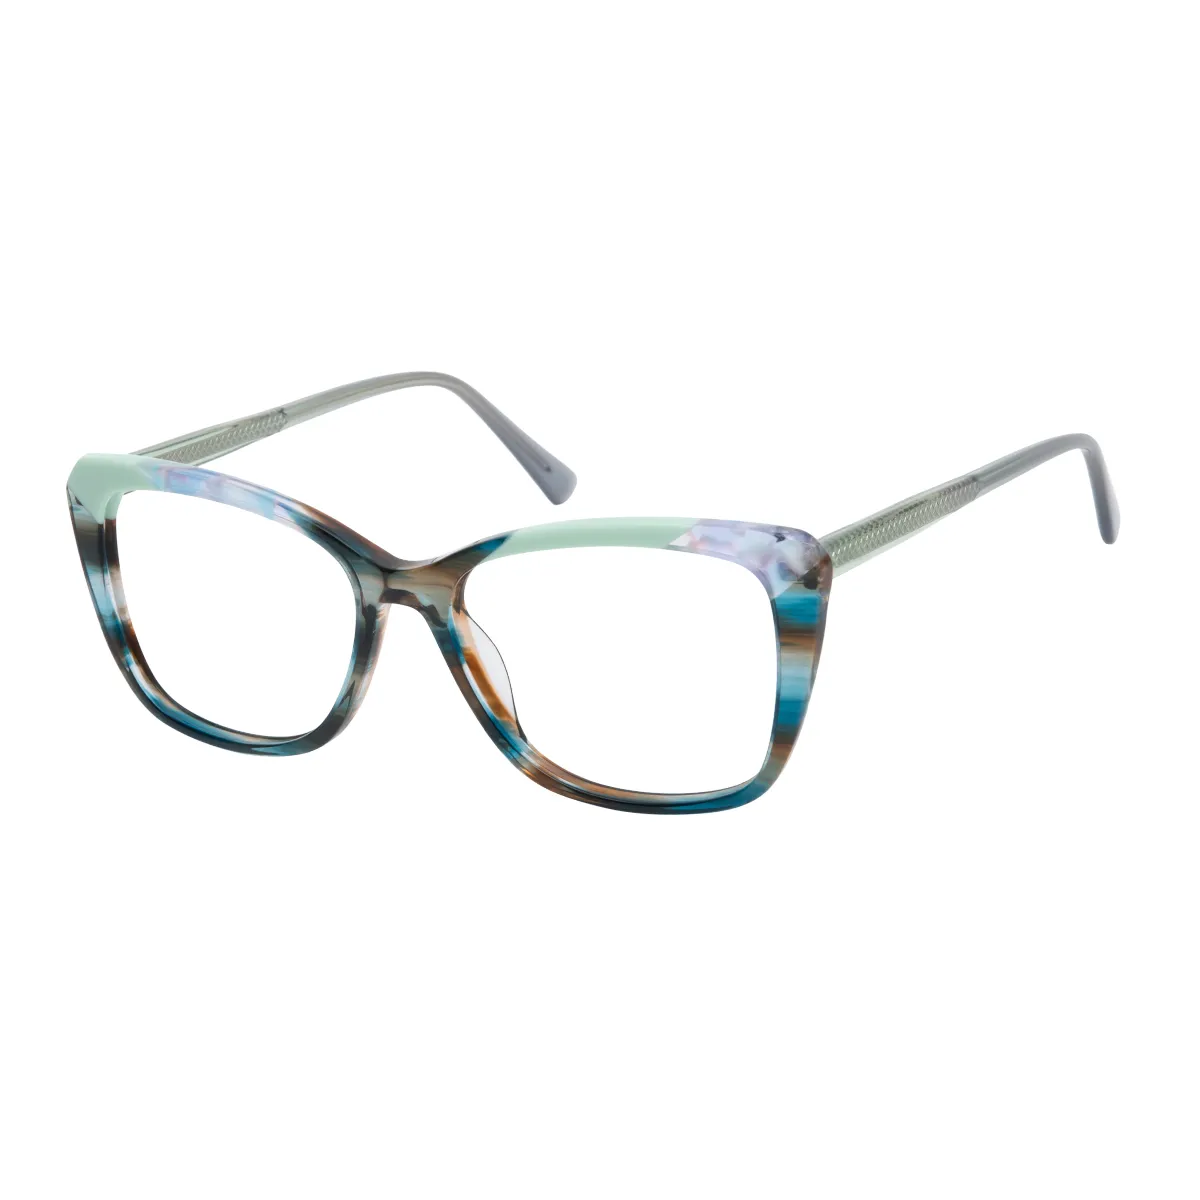 Reese - Square Pattern Glasses for Women